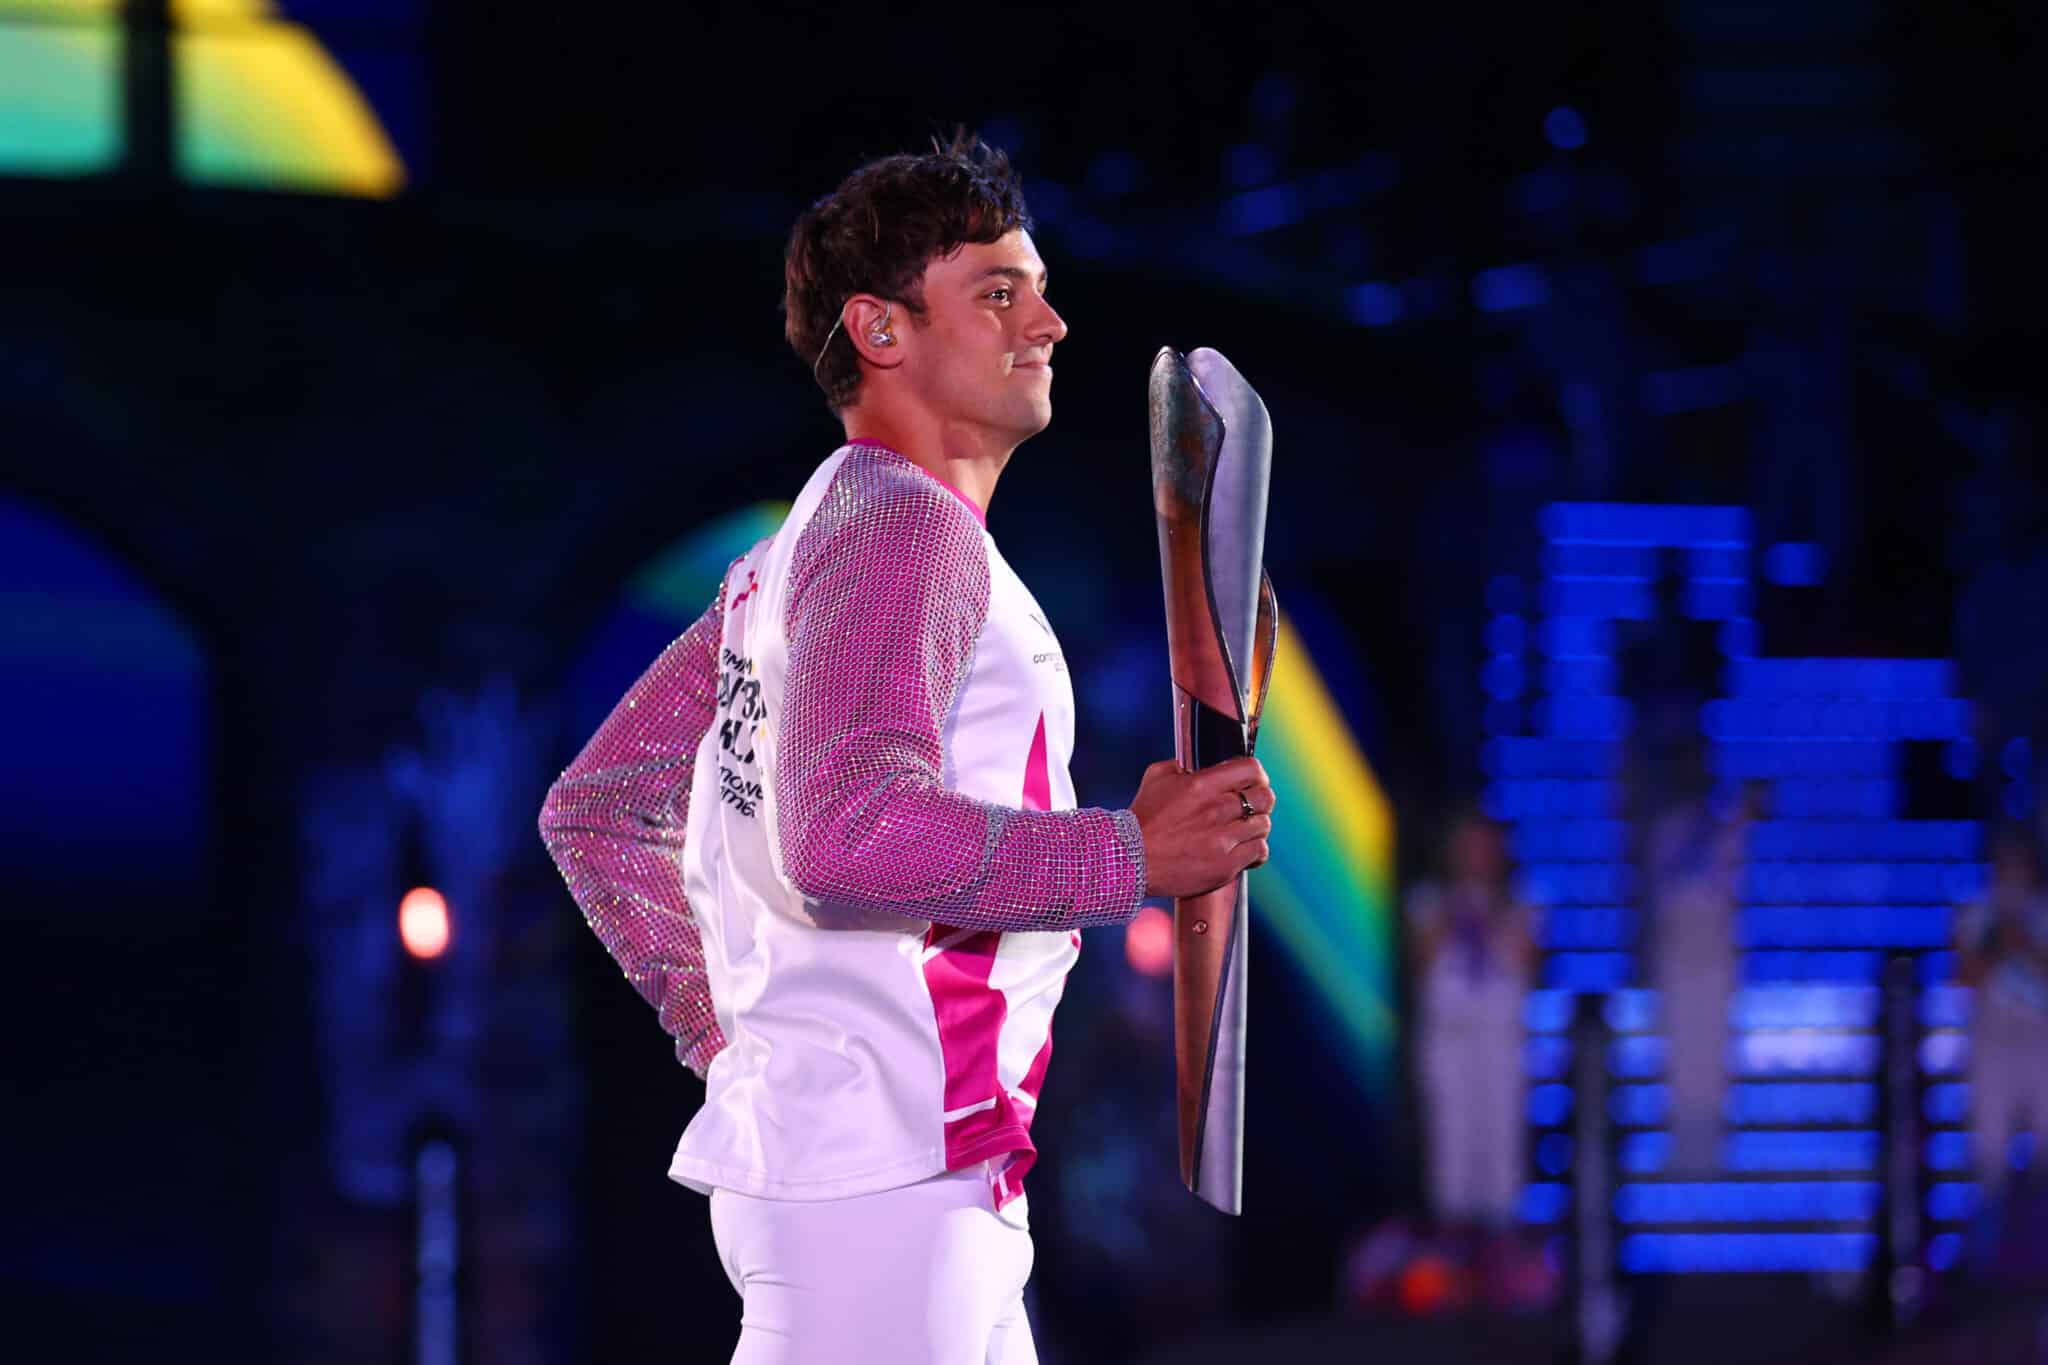 Tom Daley warns LGBTQ+ rights could go ‘back to square one’ if community doesn’t stand together